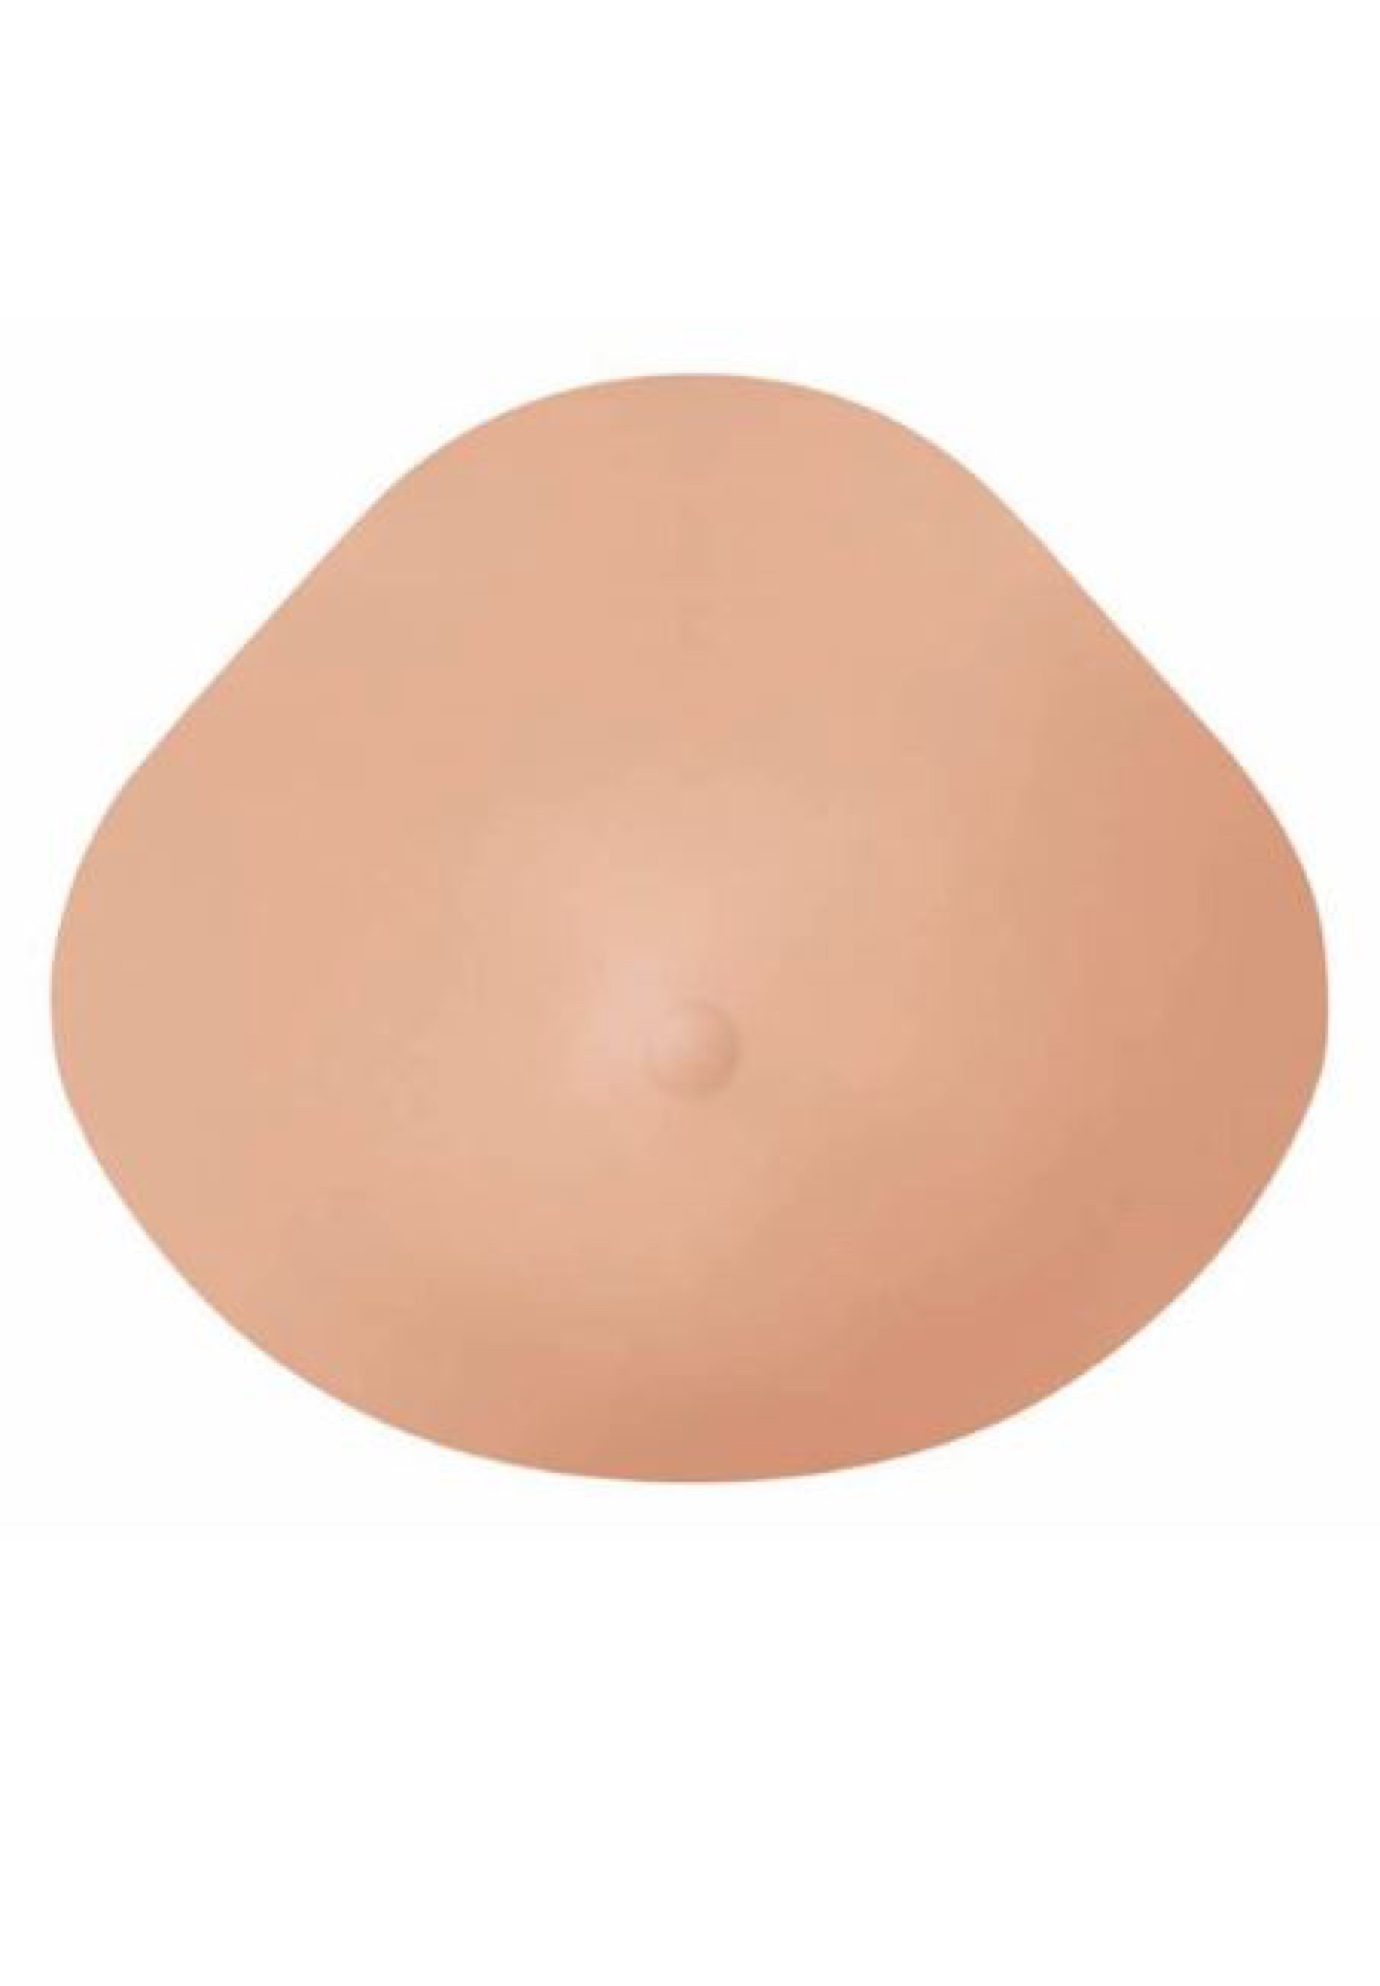 How To Make Your Own Breast Forms